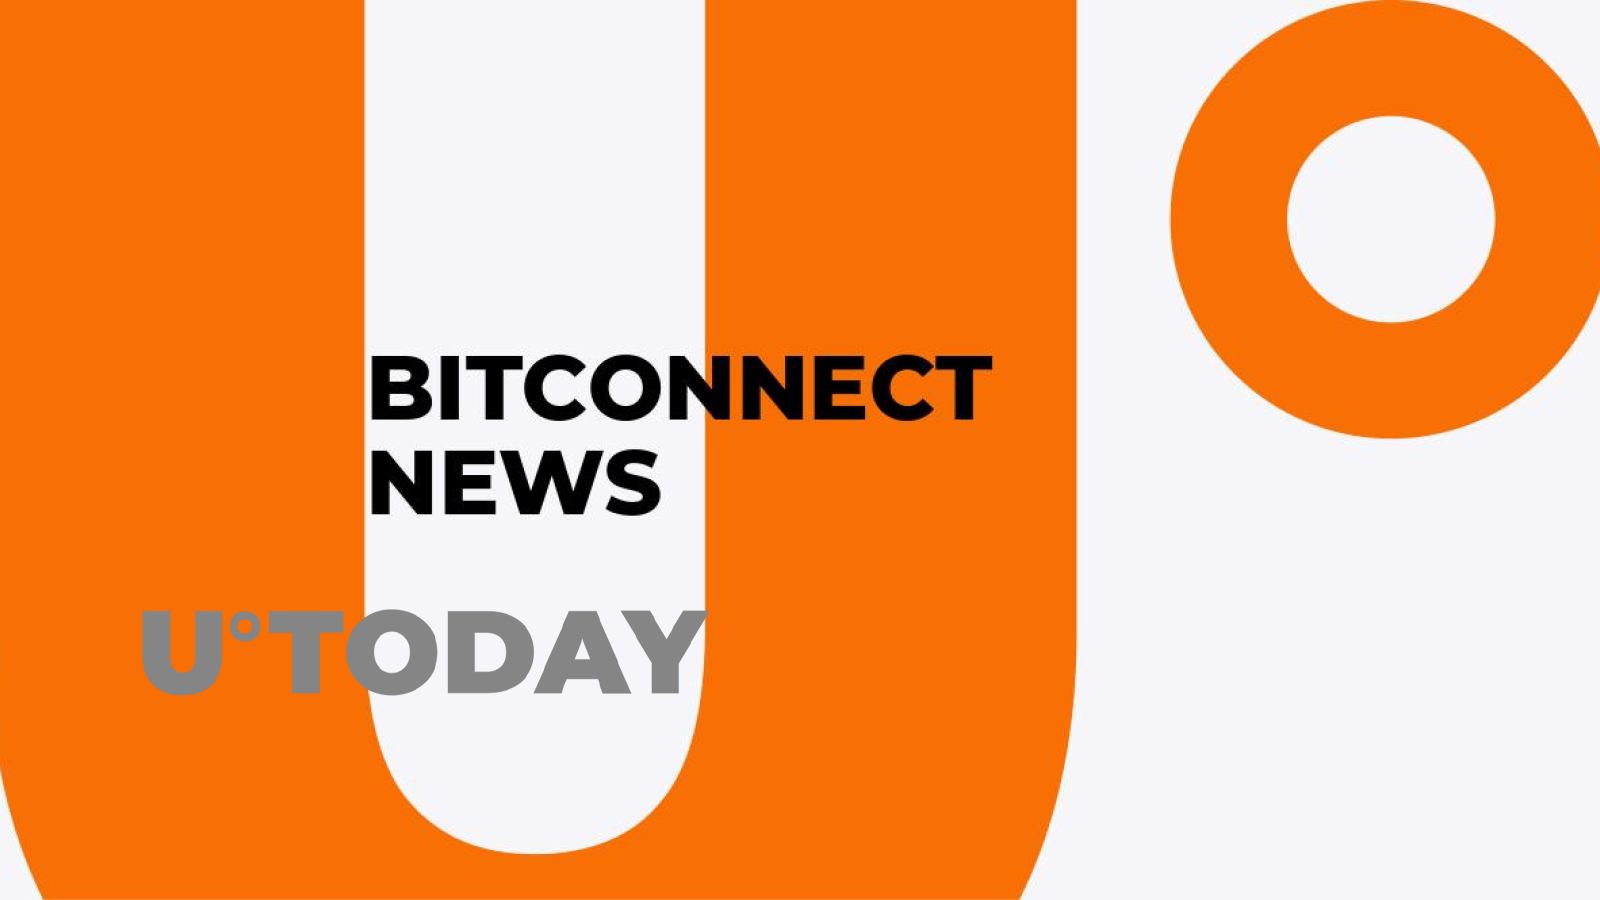 US SEC charges BitConnect founder with $2 bn cryptocurrency fraud - The Economic Times